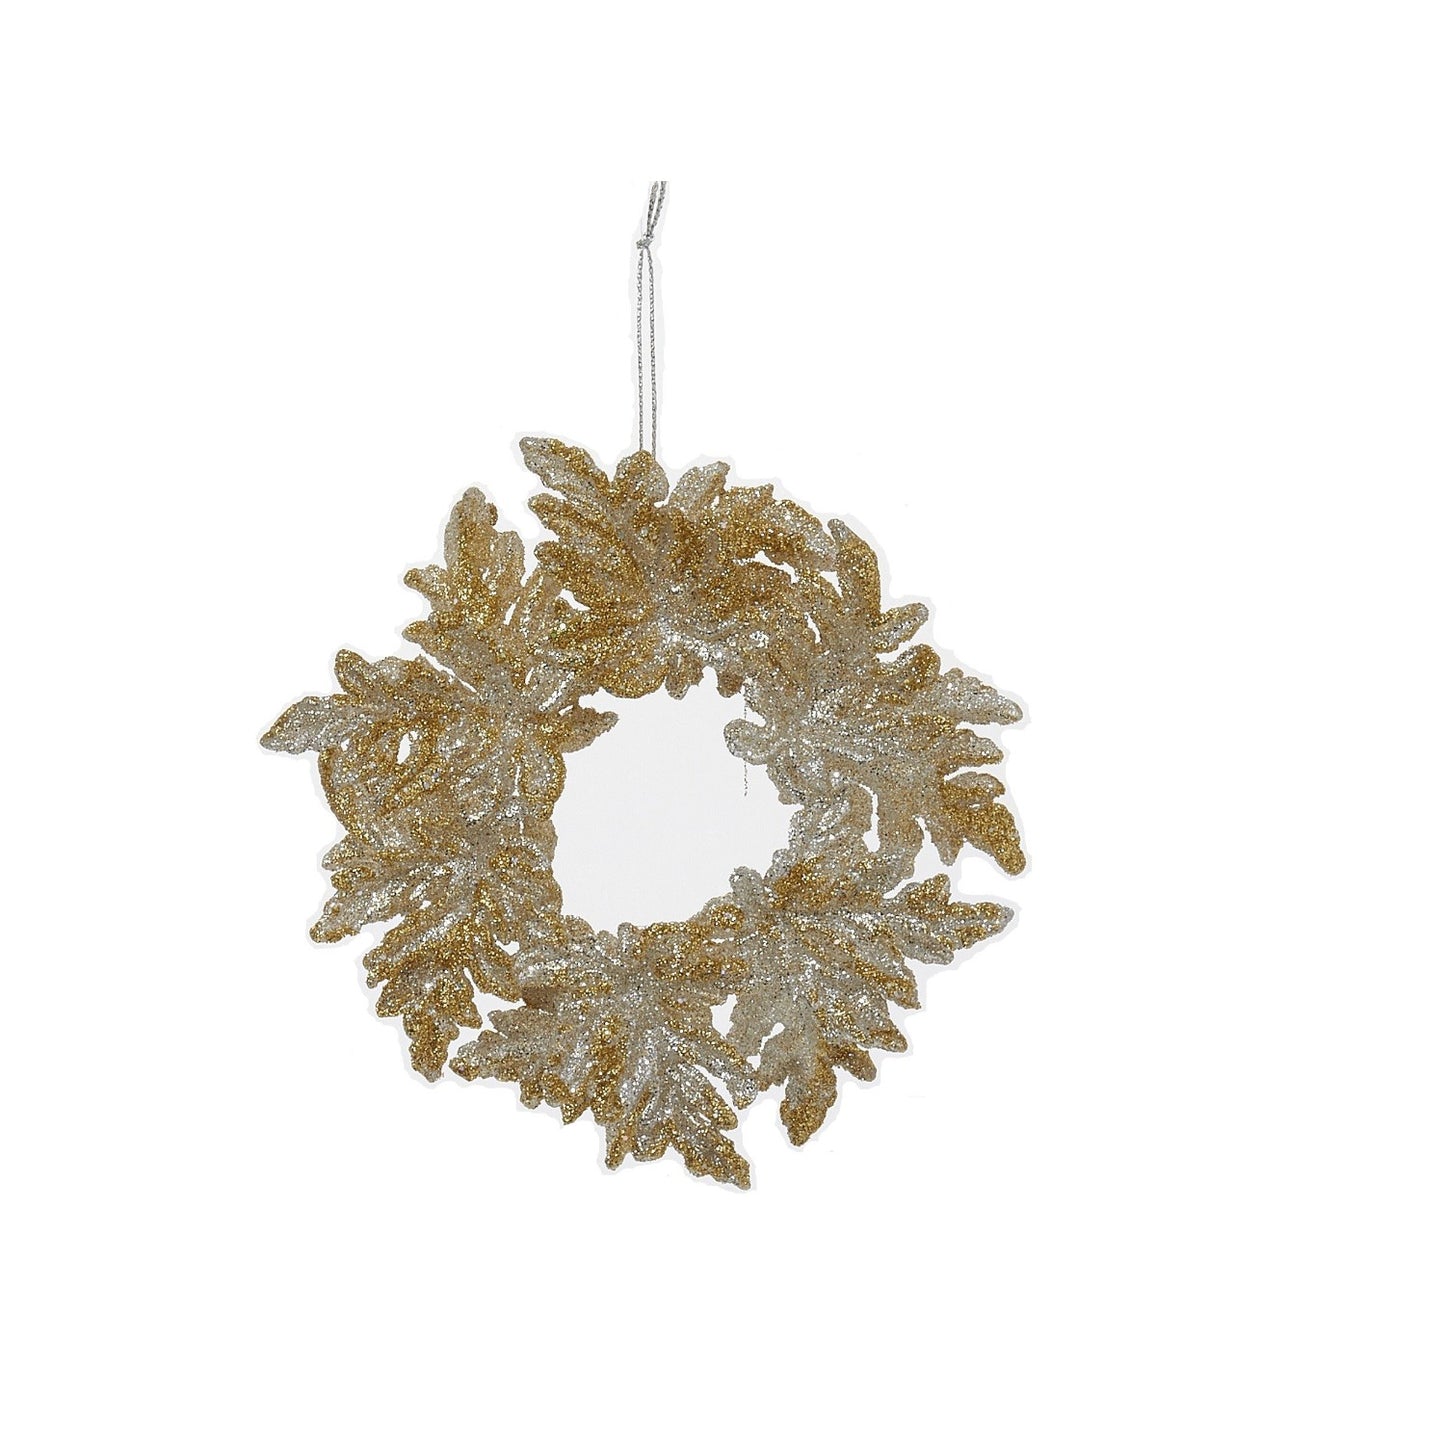 Kurt S Adler Christmas Wreath - Silver Accented With Gold